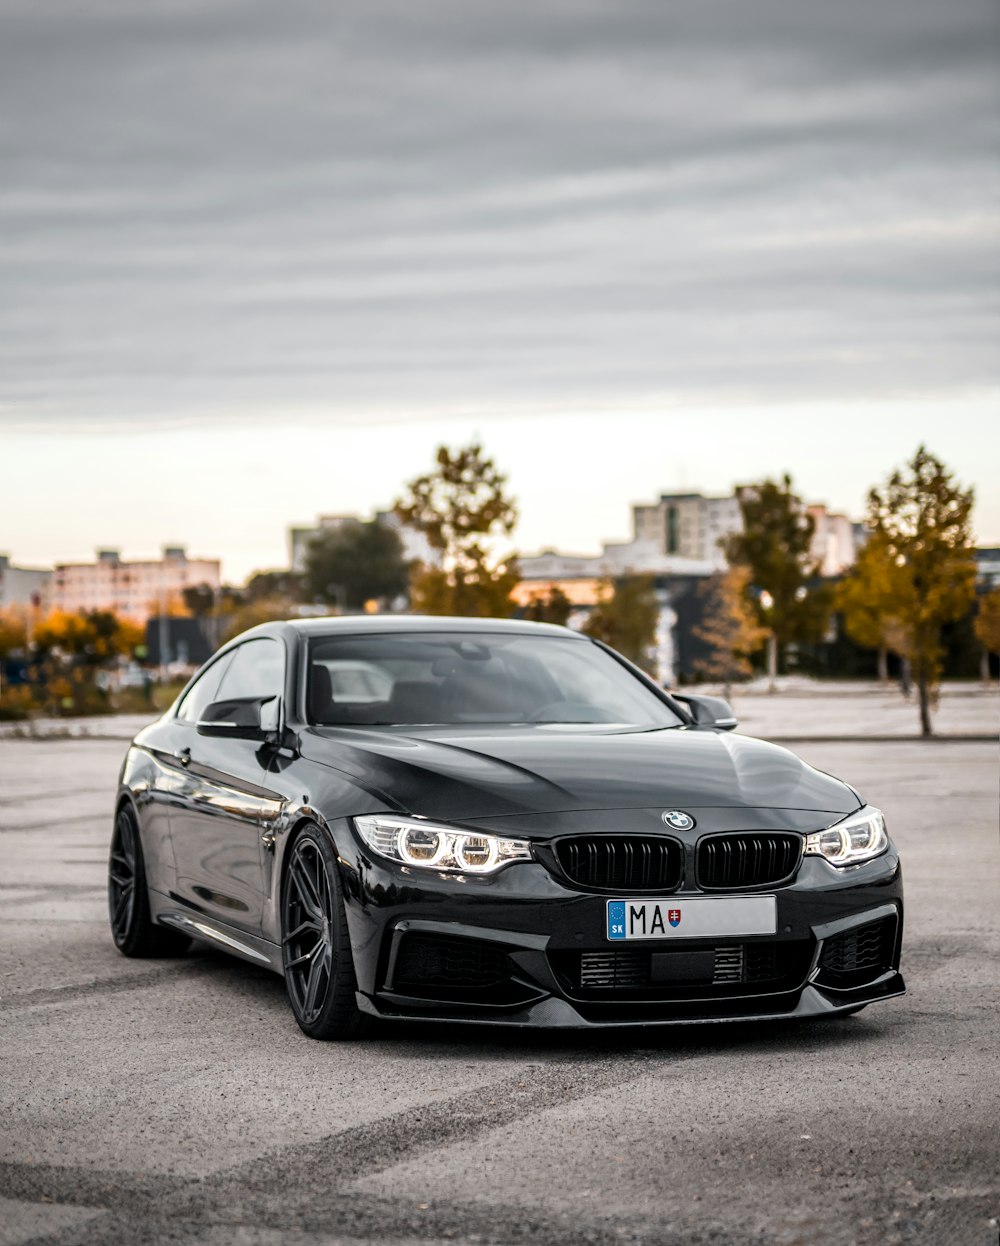 Bmw M4 Pictures Hd Download Free Images On Unsplash